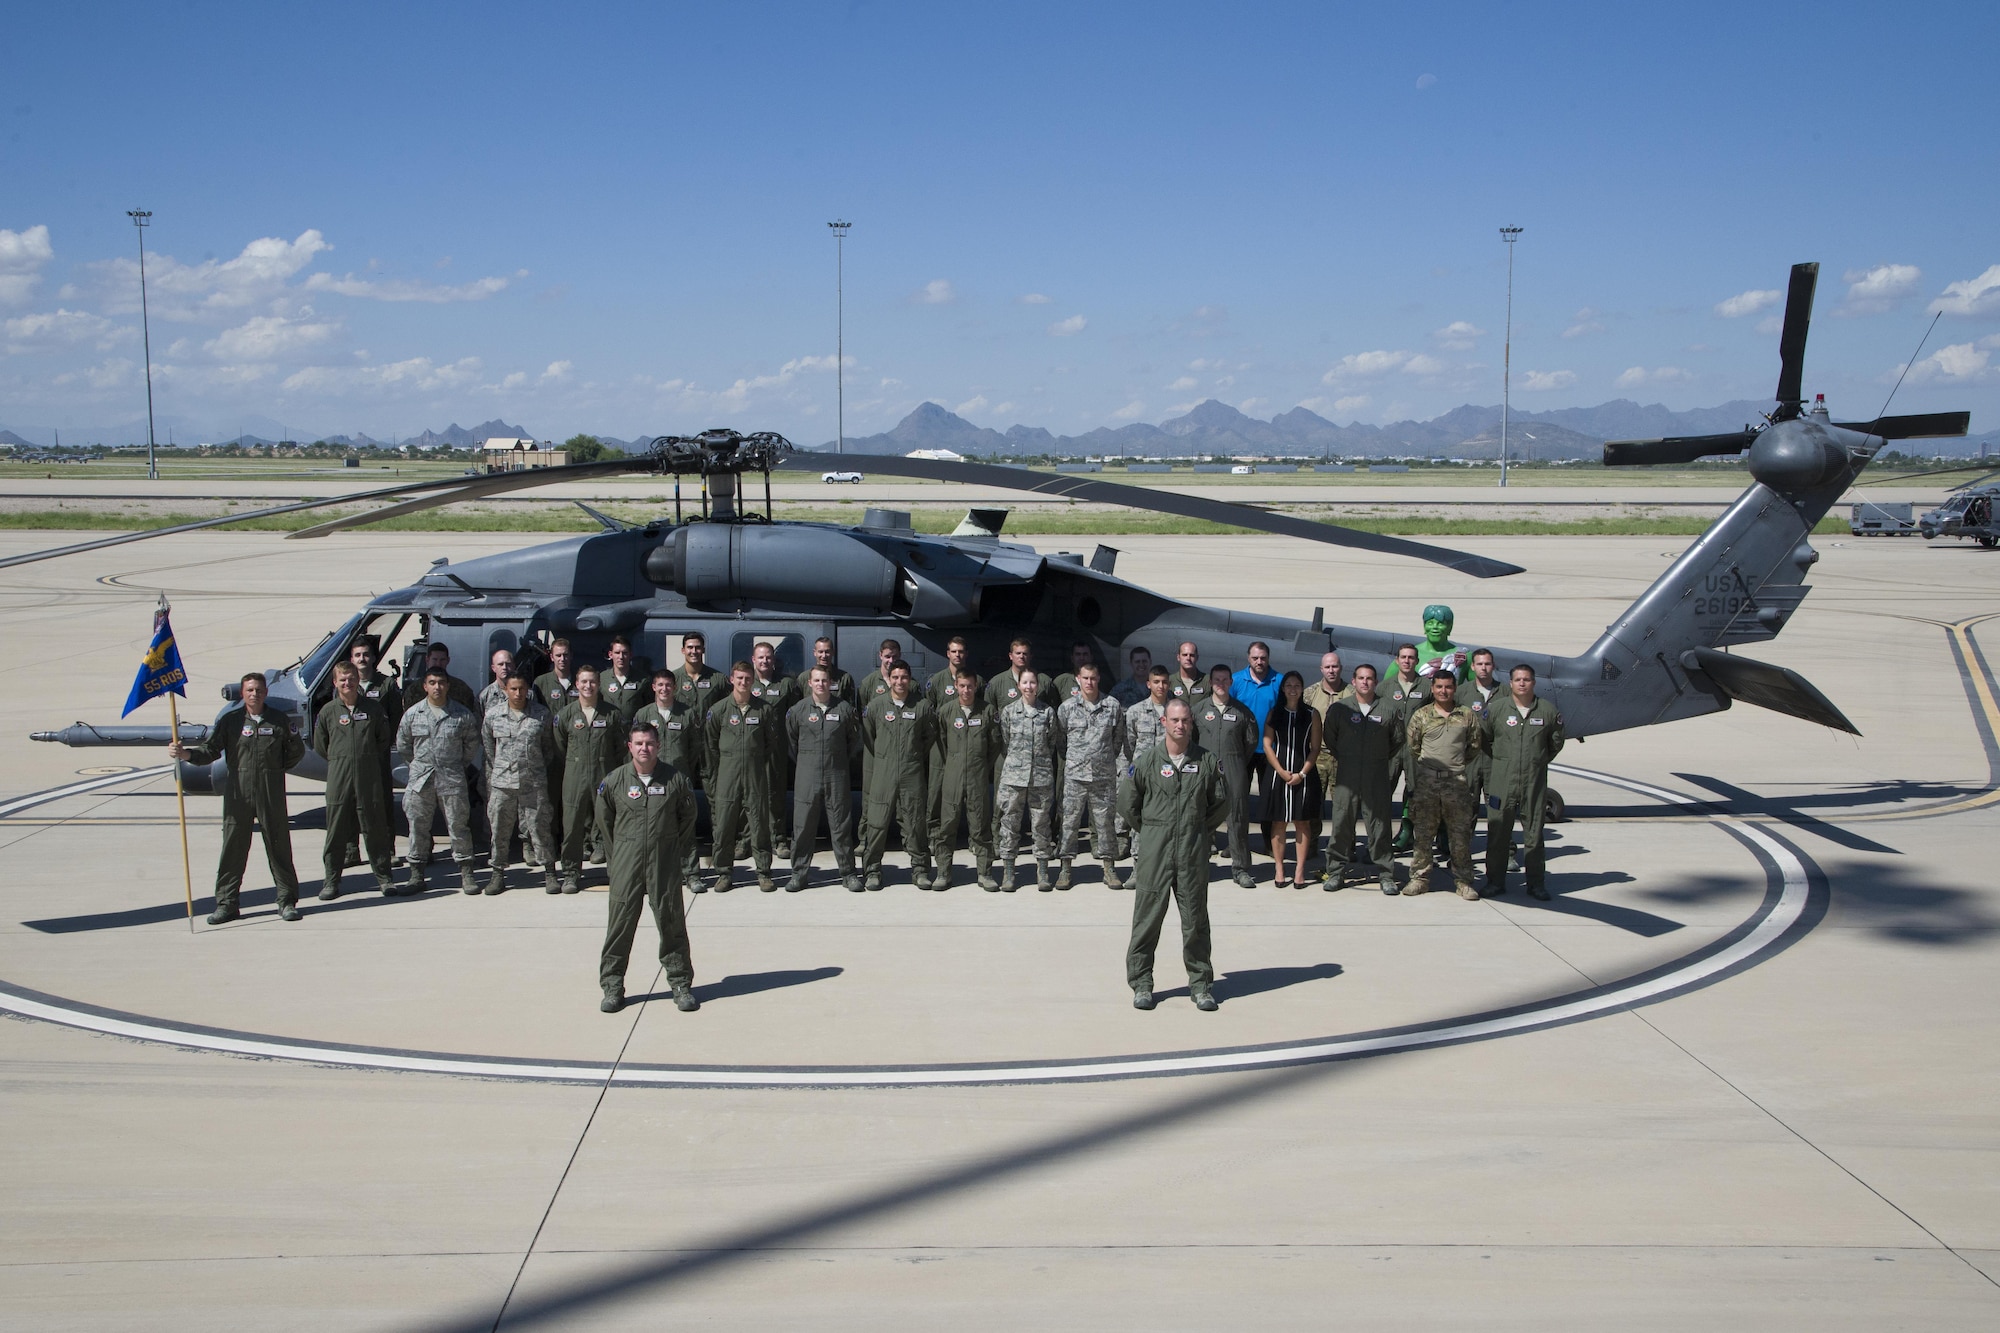 U.S. Airmen form the 55th Rescue Squadron pose for a group photo in front of an HH-60G Pave Hawk at Davis-Monthan Air Force Base, Ariz., Sept. 21, 2016.  The 55th RQS operates out of D-M but falls under the 23d Wing headquartered at Moody AFB, Ga. (U.S. Air Force photo by Senior Airman Betty R. Chevalier)